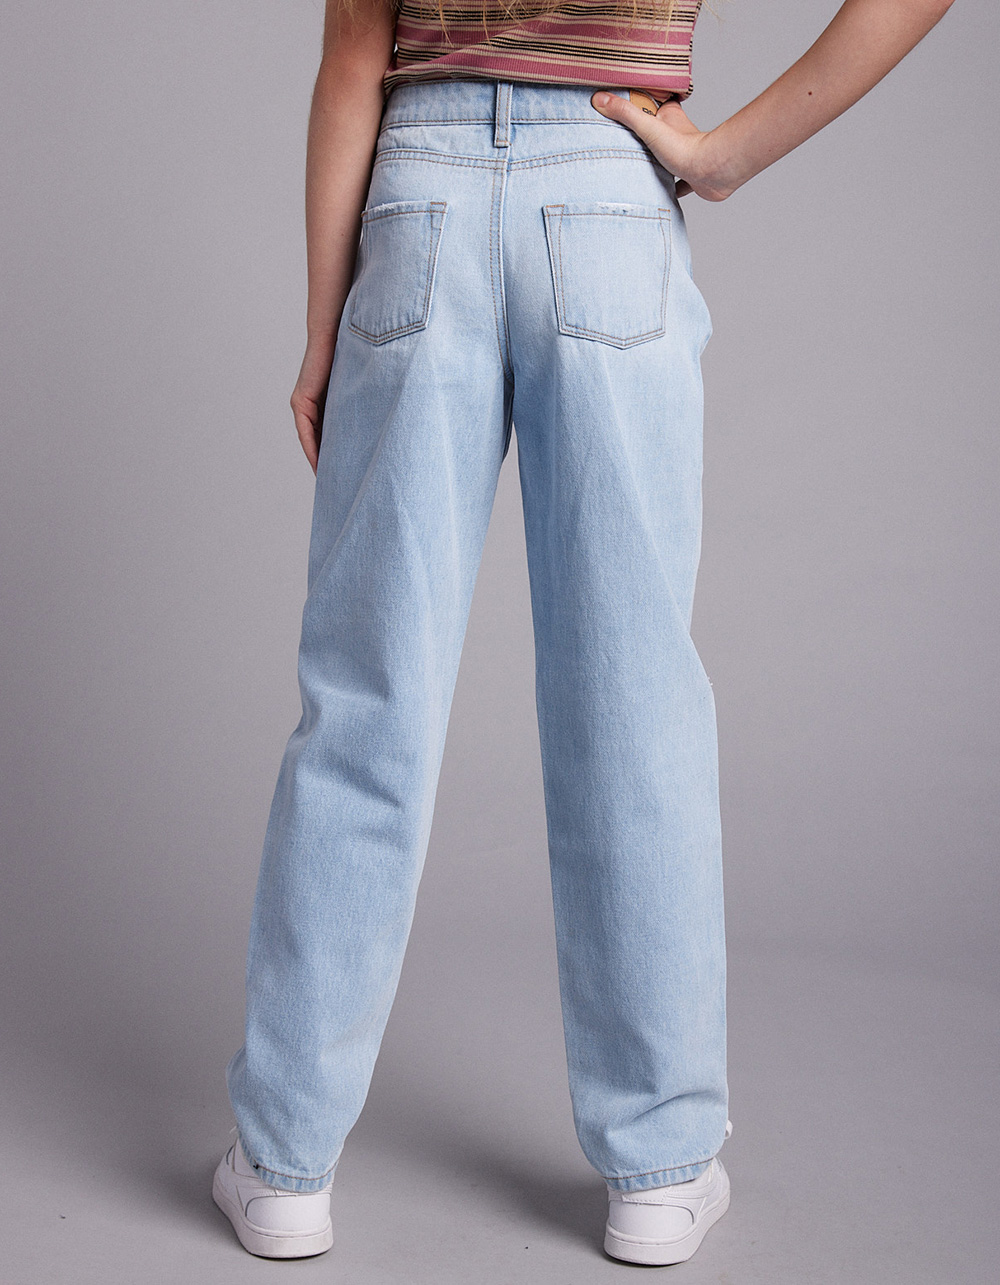 RSQ Girls High Rise 90's Jeans - LIGHT WASH